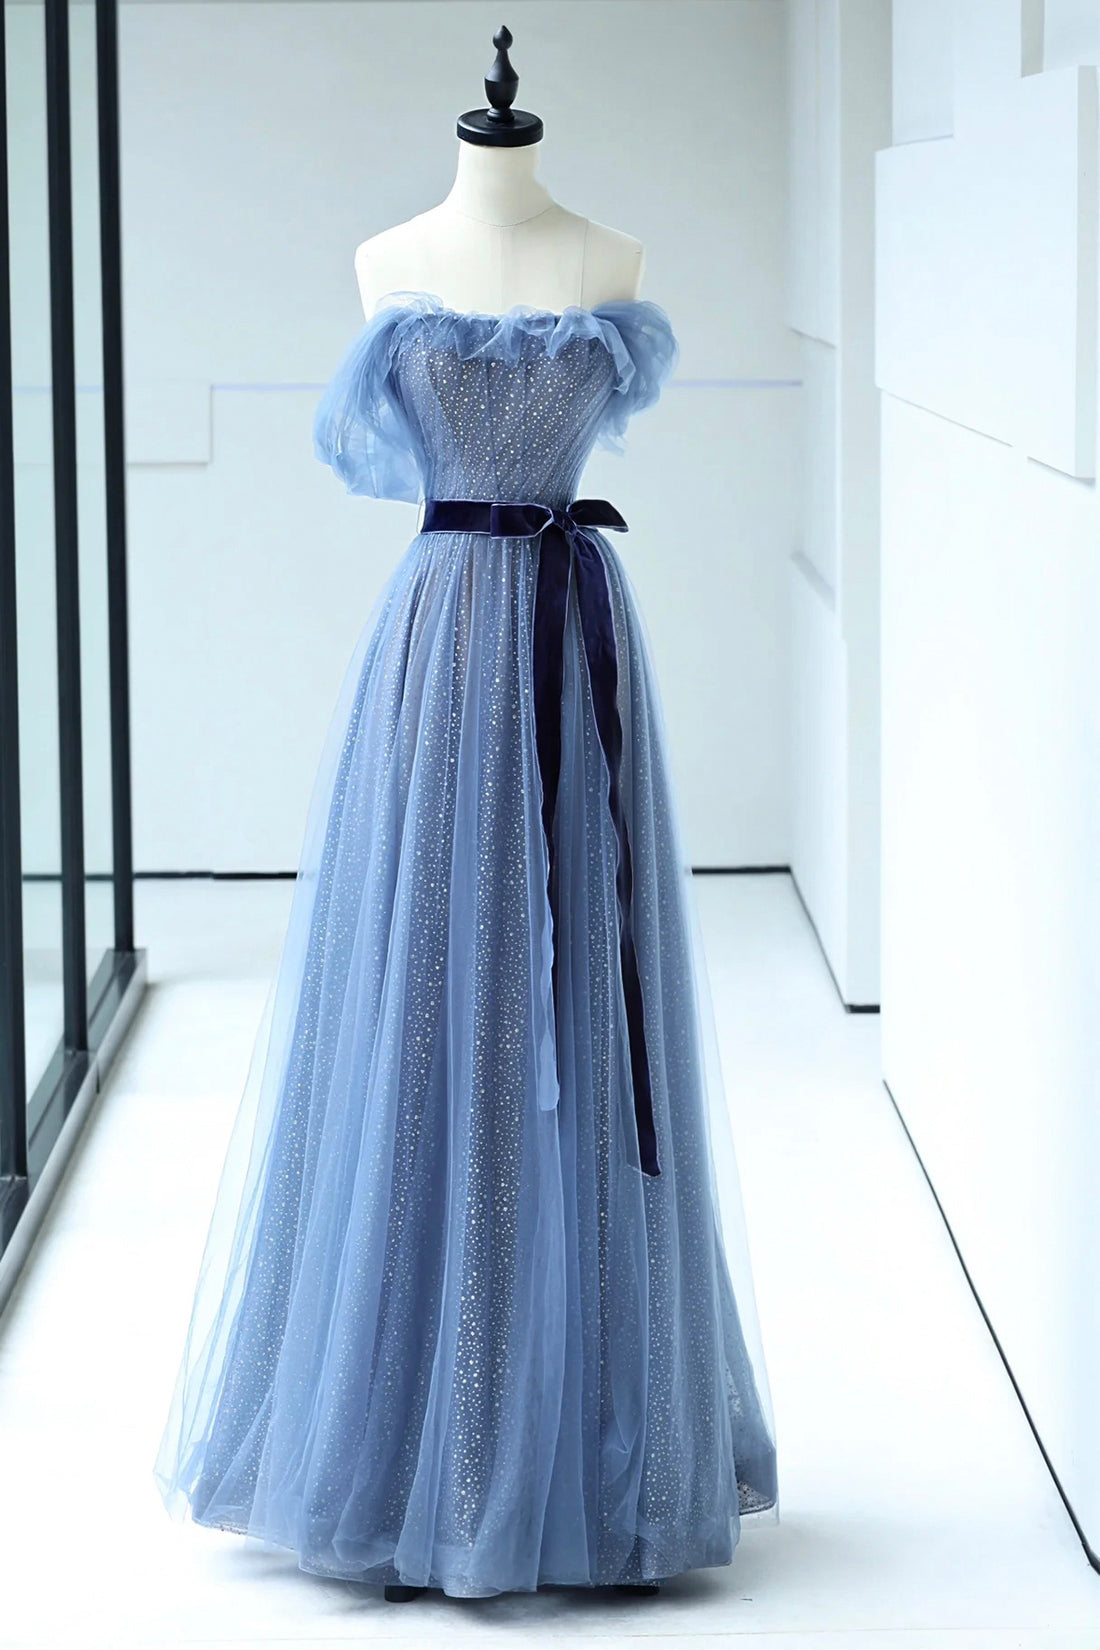 Blue Floor Length Corset Prom Dress, A-line Strapless Tulle Evening Dress outfit, Prom Dresses Long Sleeve